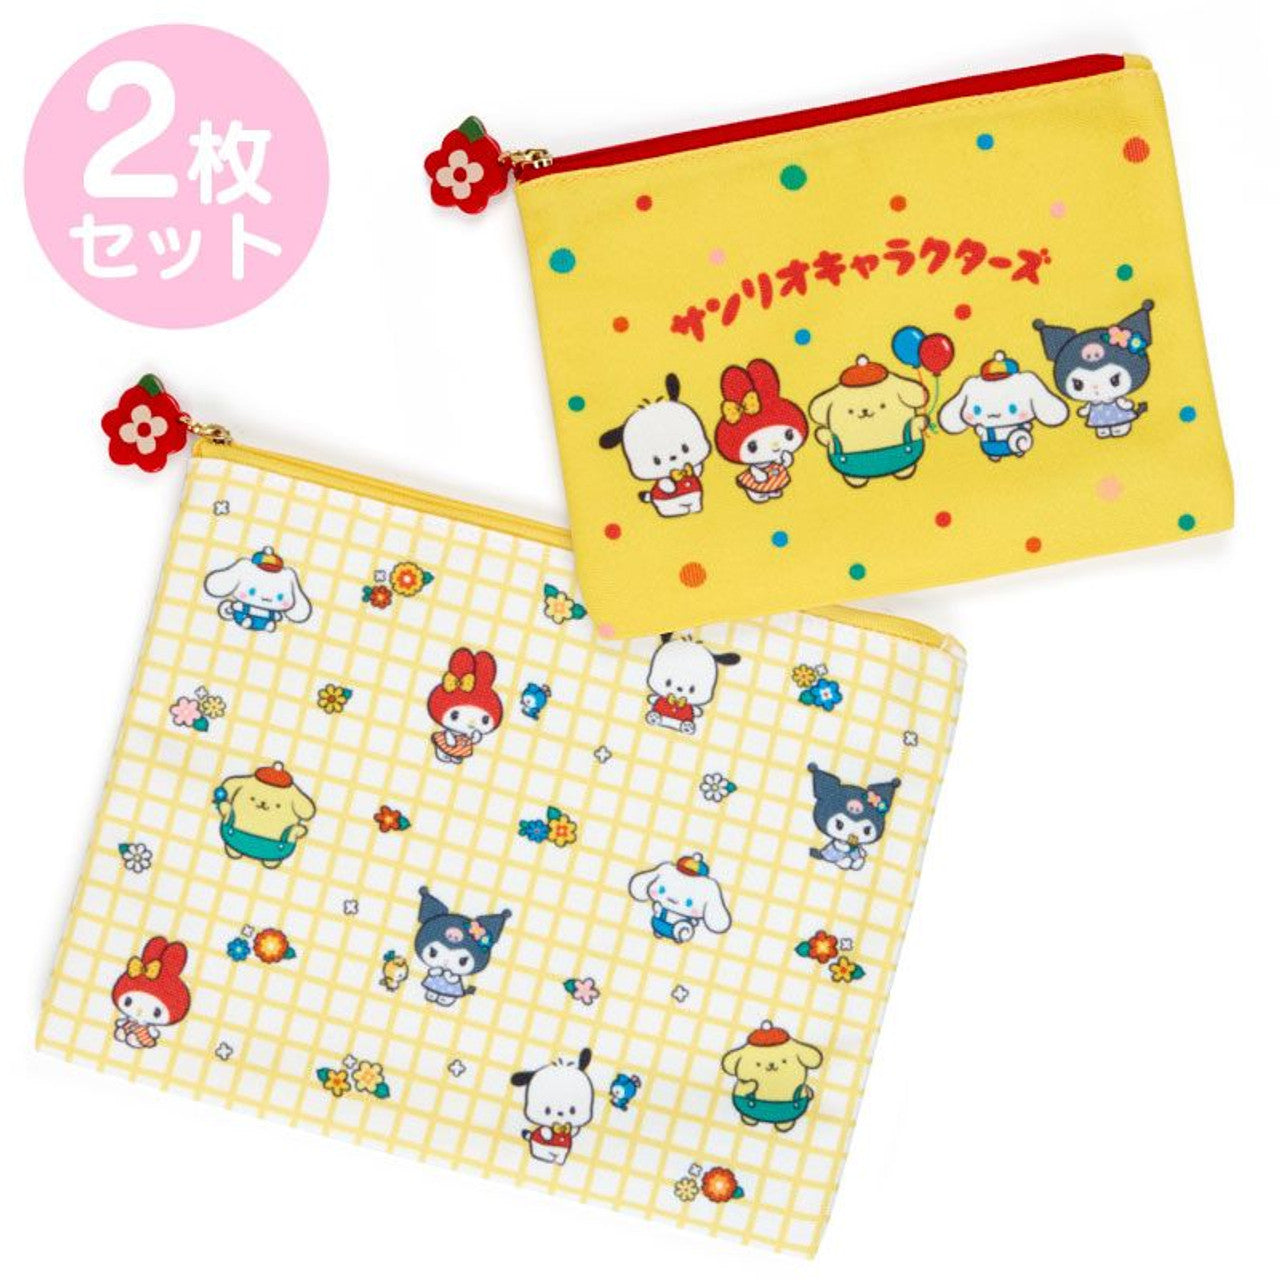 Sanrio Pouch Set of 2 (490512)